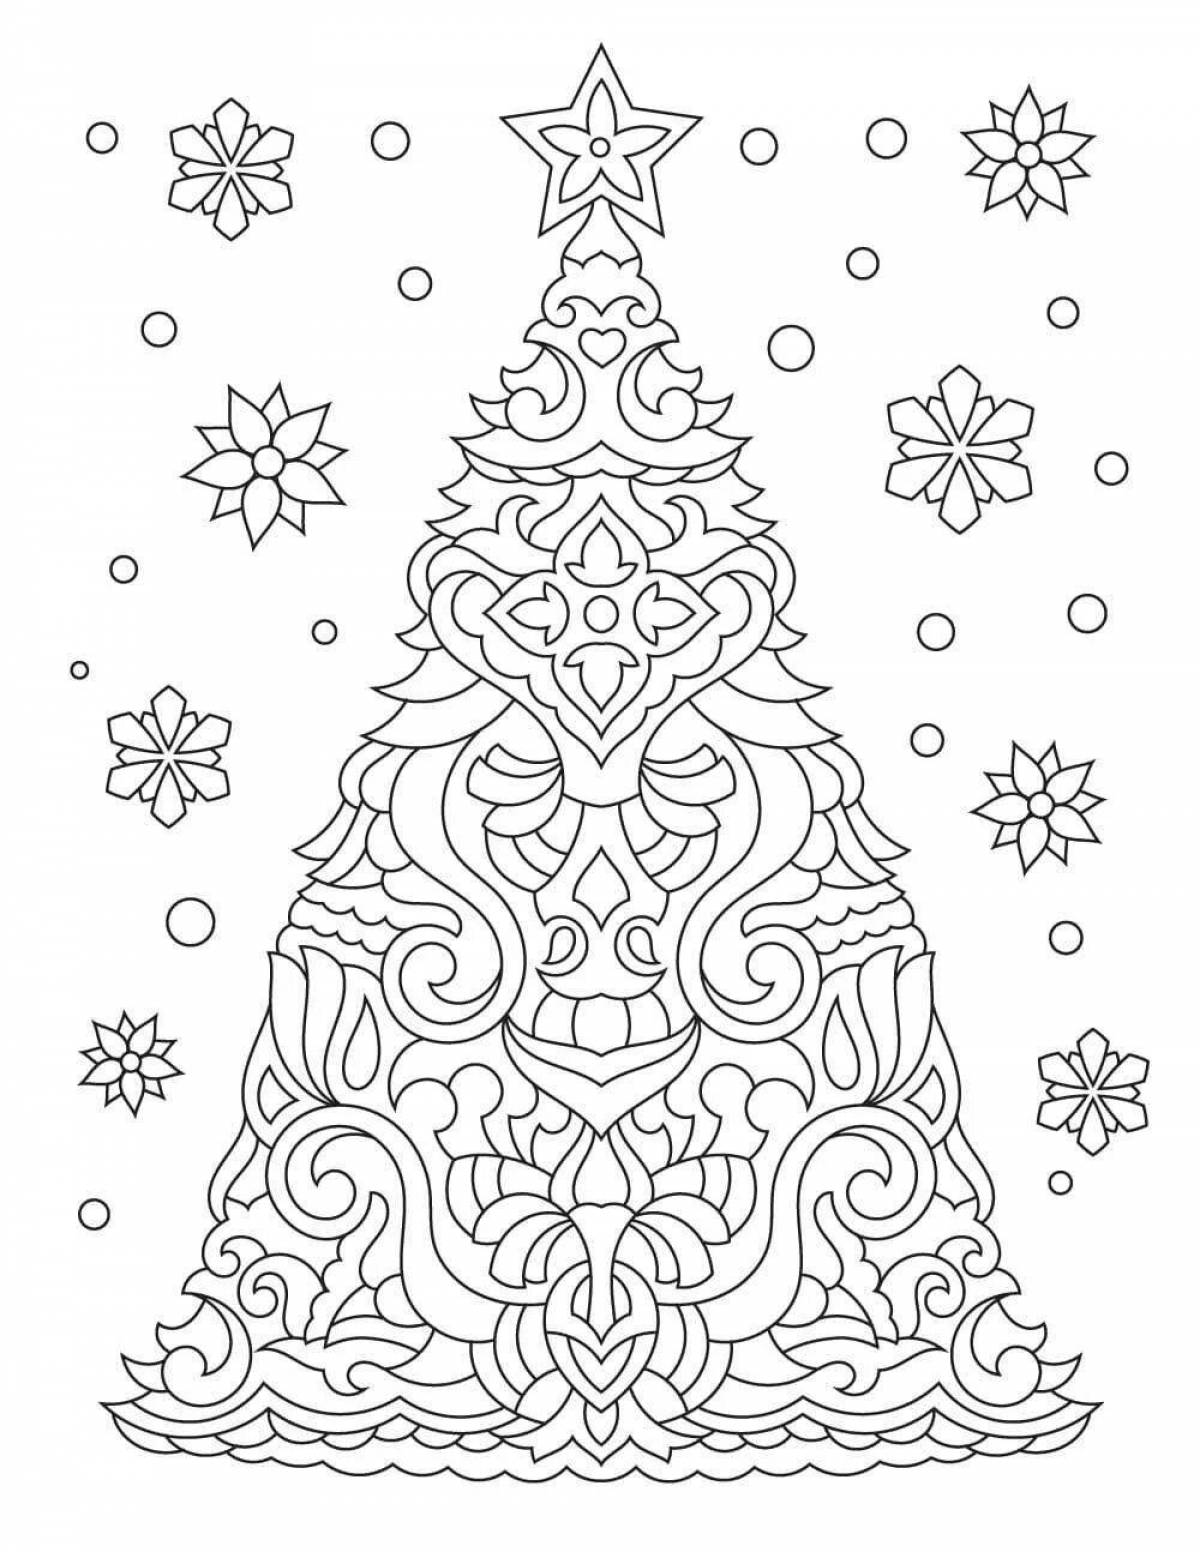 Merry Christmas tree coloring book